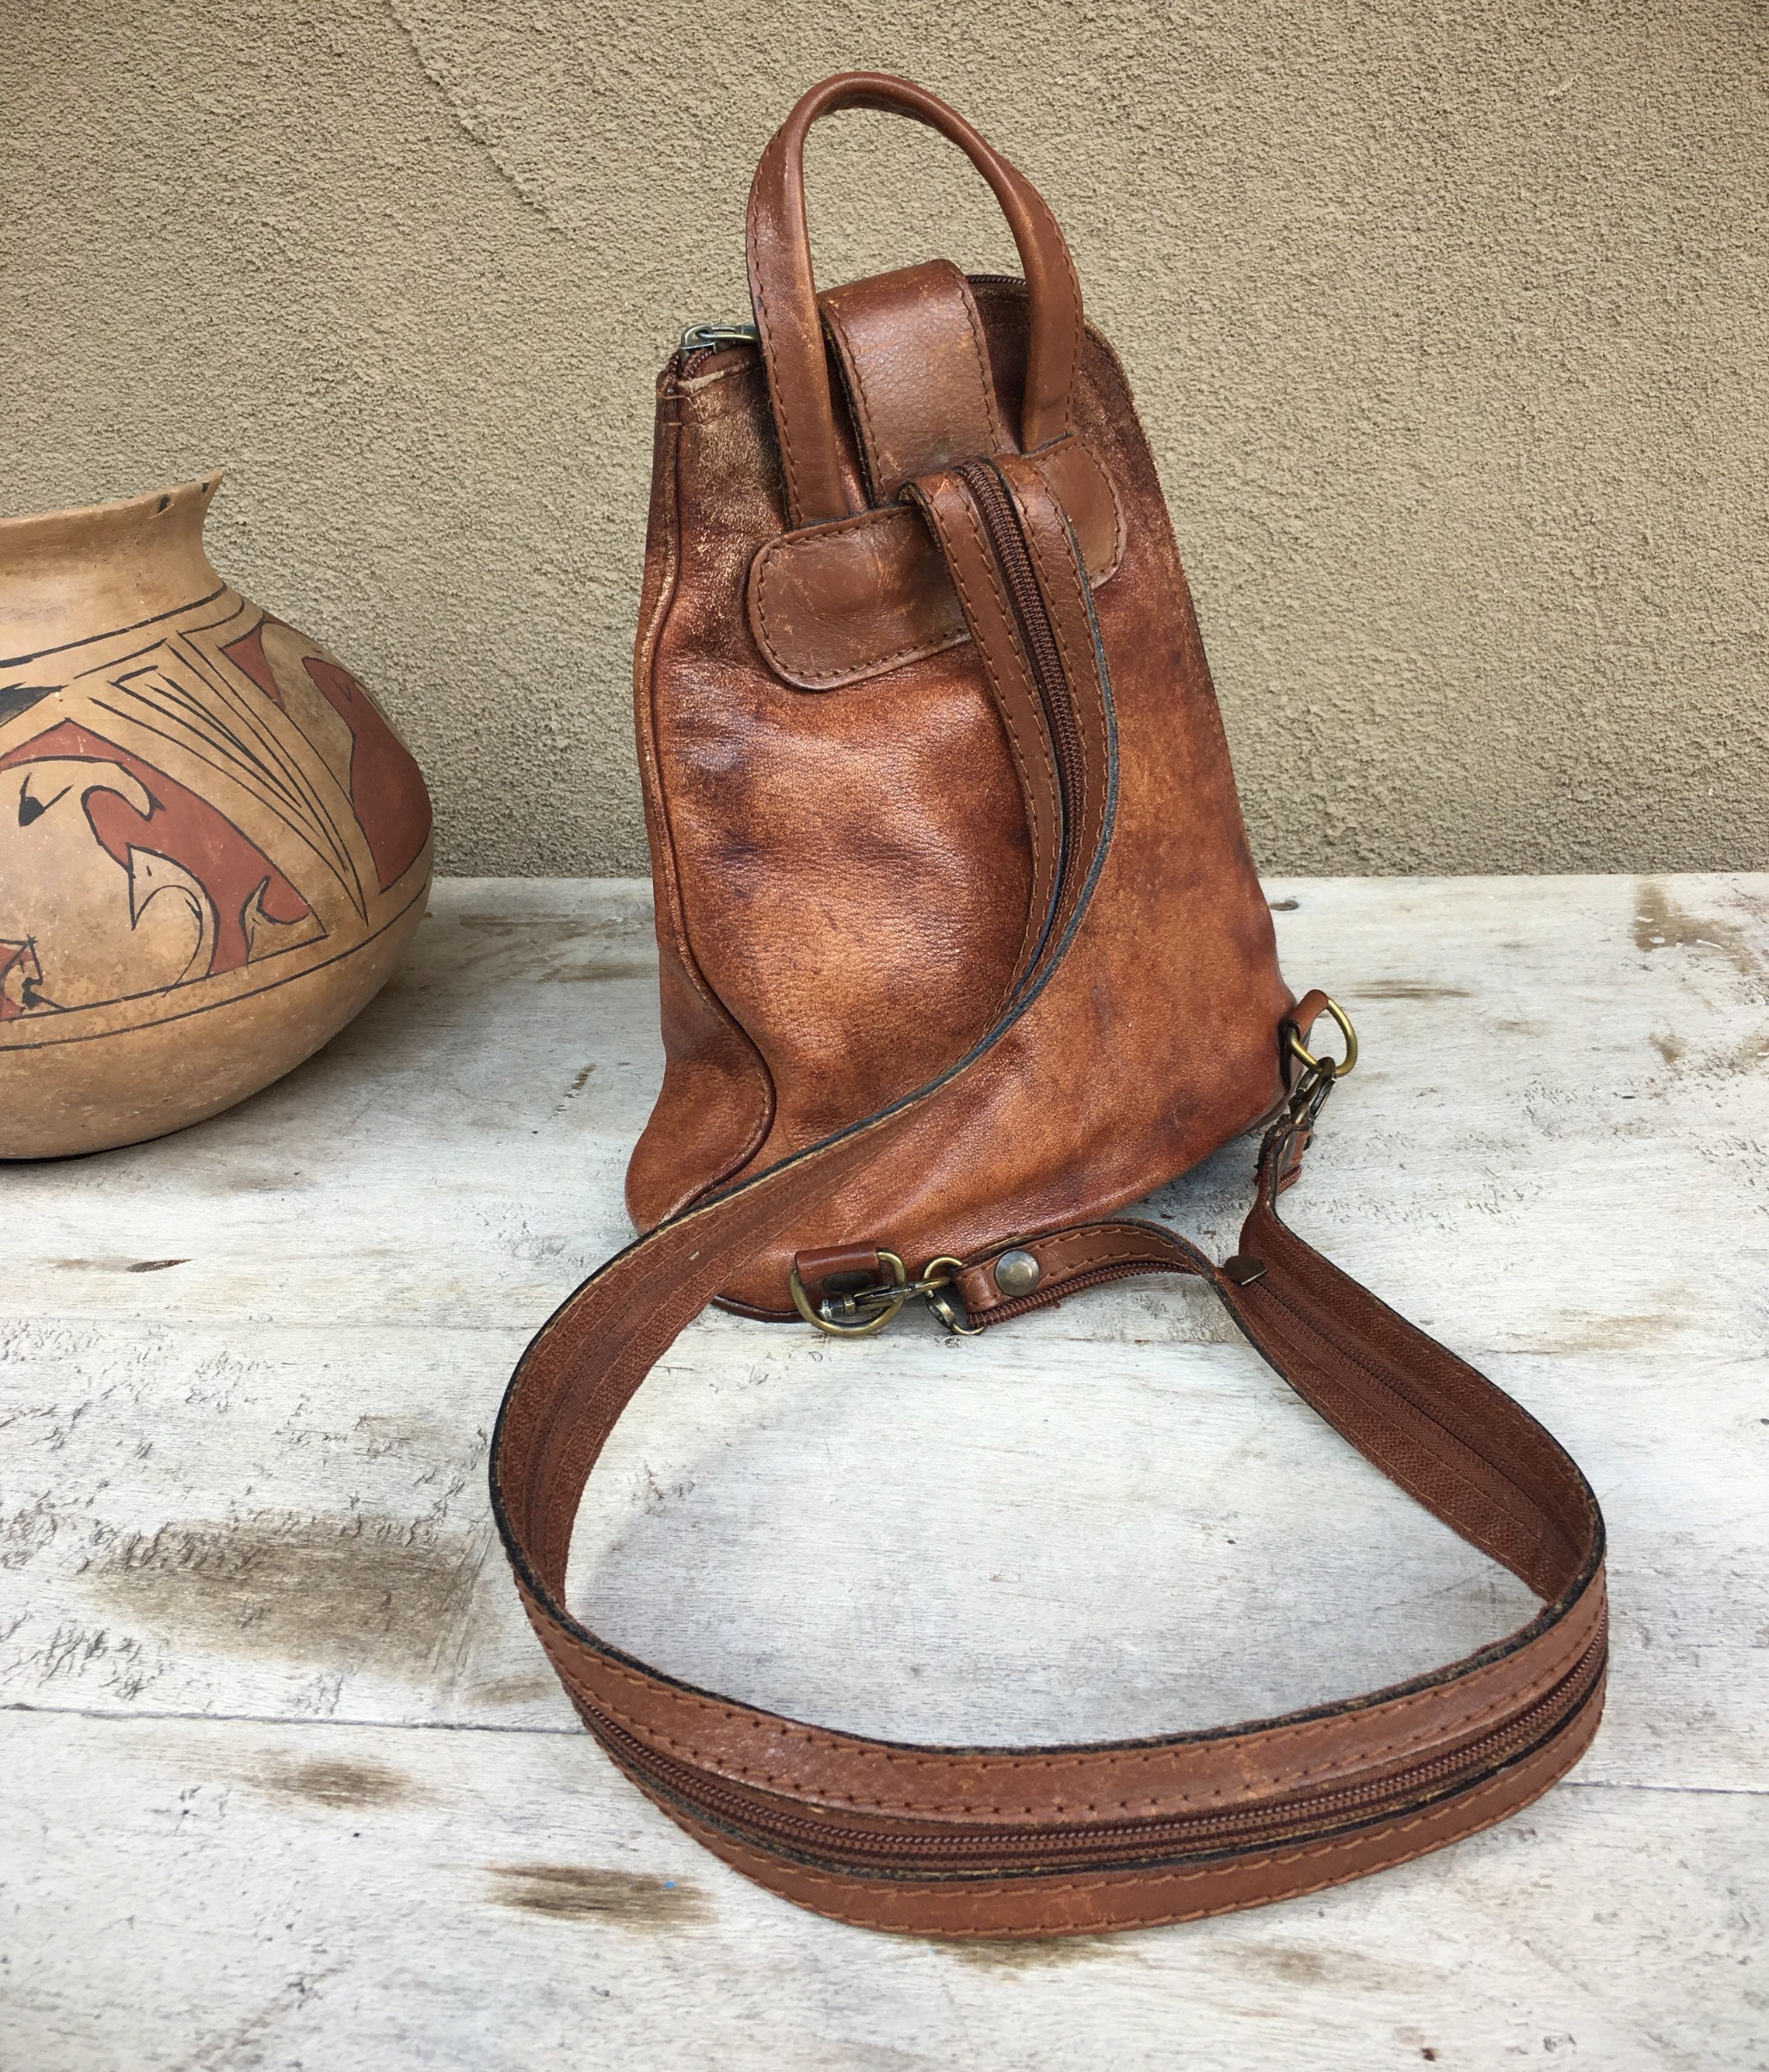 Vintage Small Sling Bag Chestnut Brown Italian Leather Single Strap ...